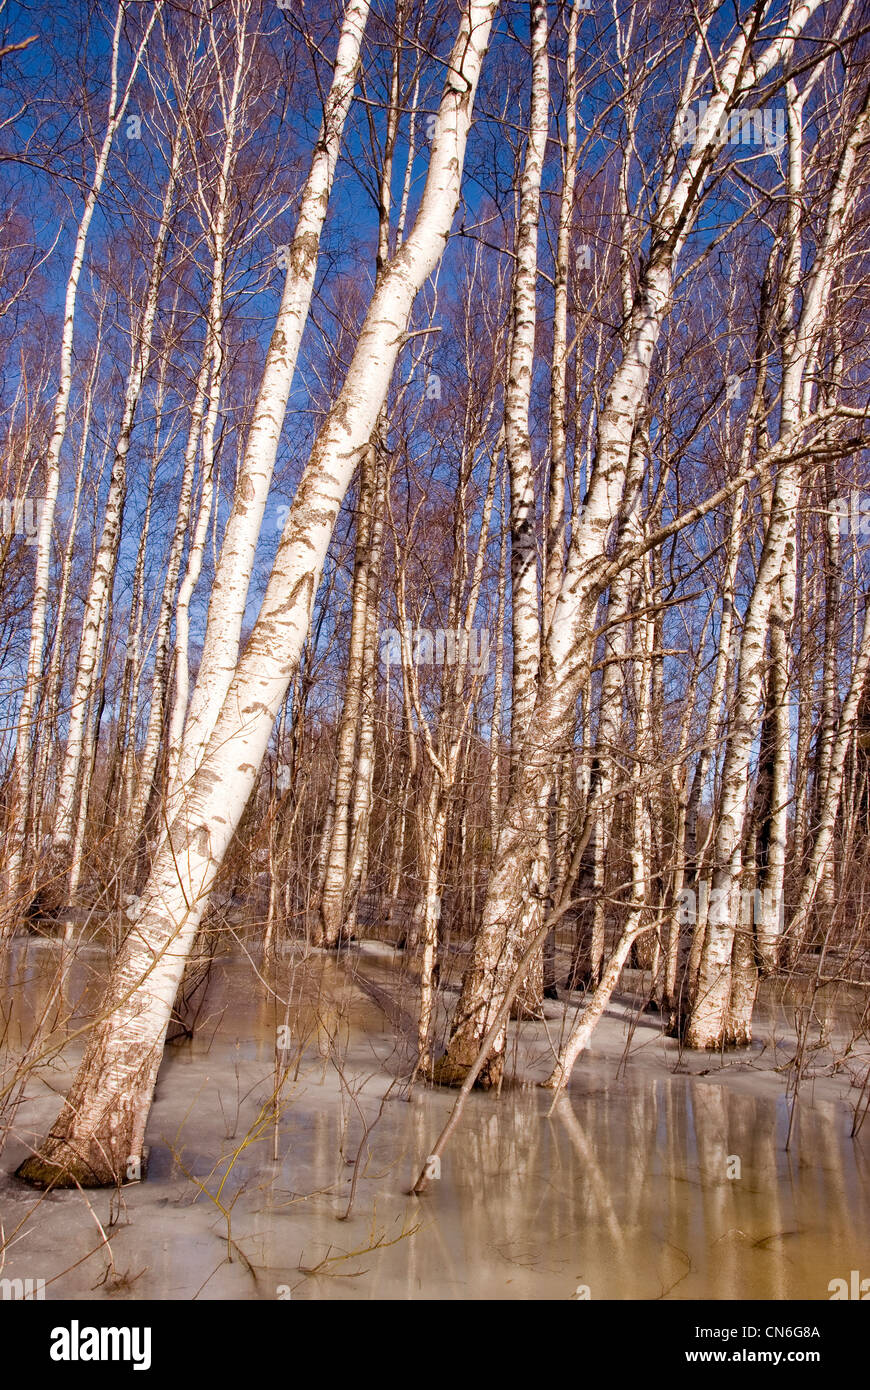 Background of natural birch tree forest trunks branches and snow defrosting in spring. Stock Photo